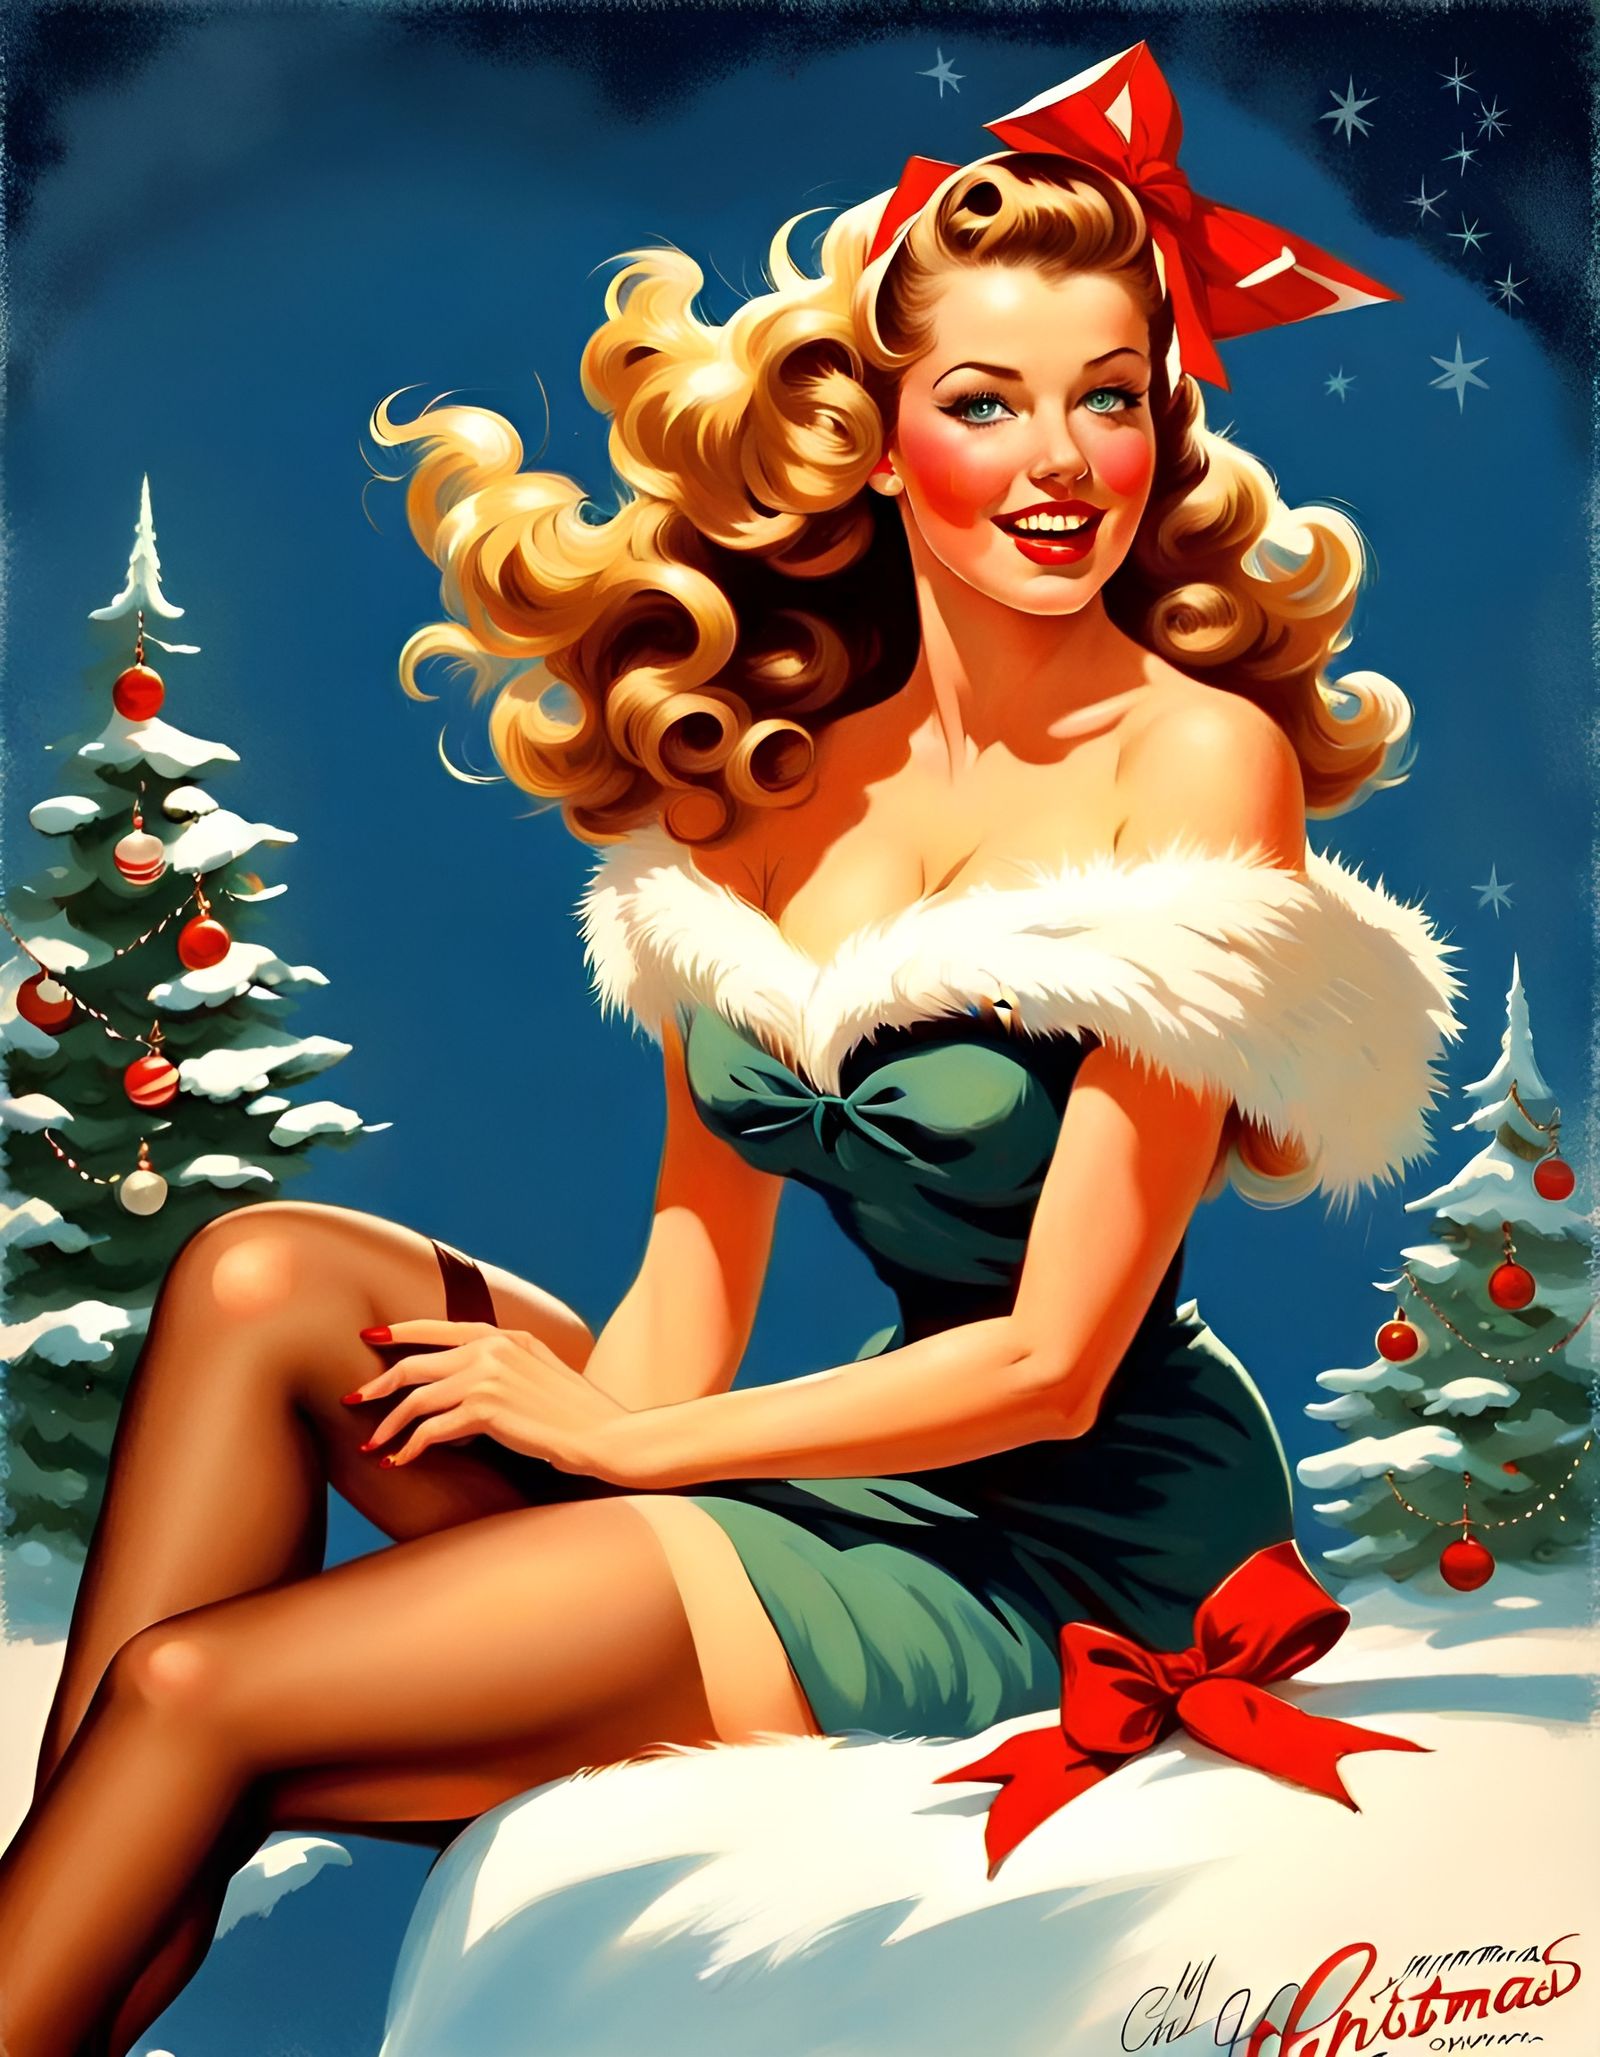 My Open Prompt - Christmas Pin Up Girl, Inspiration of Gil